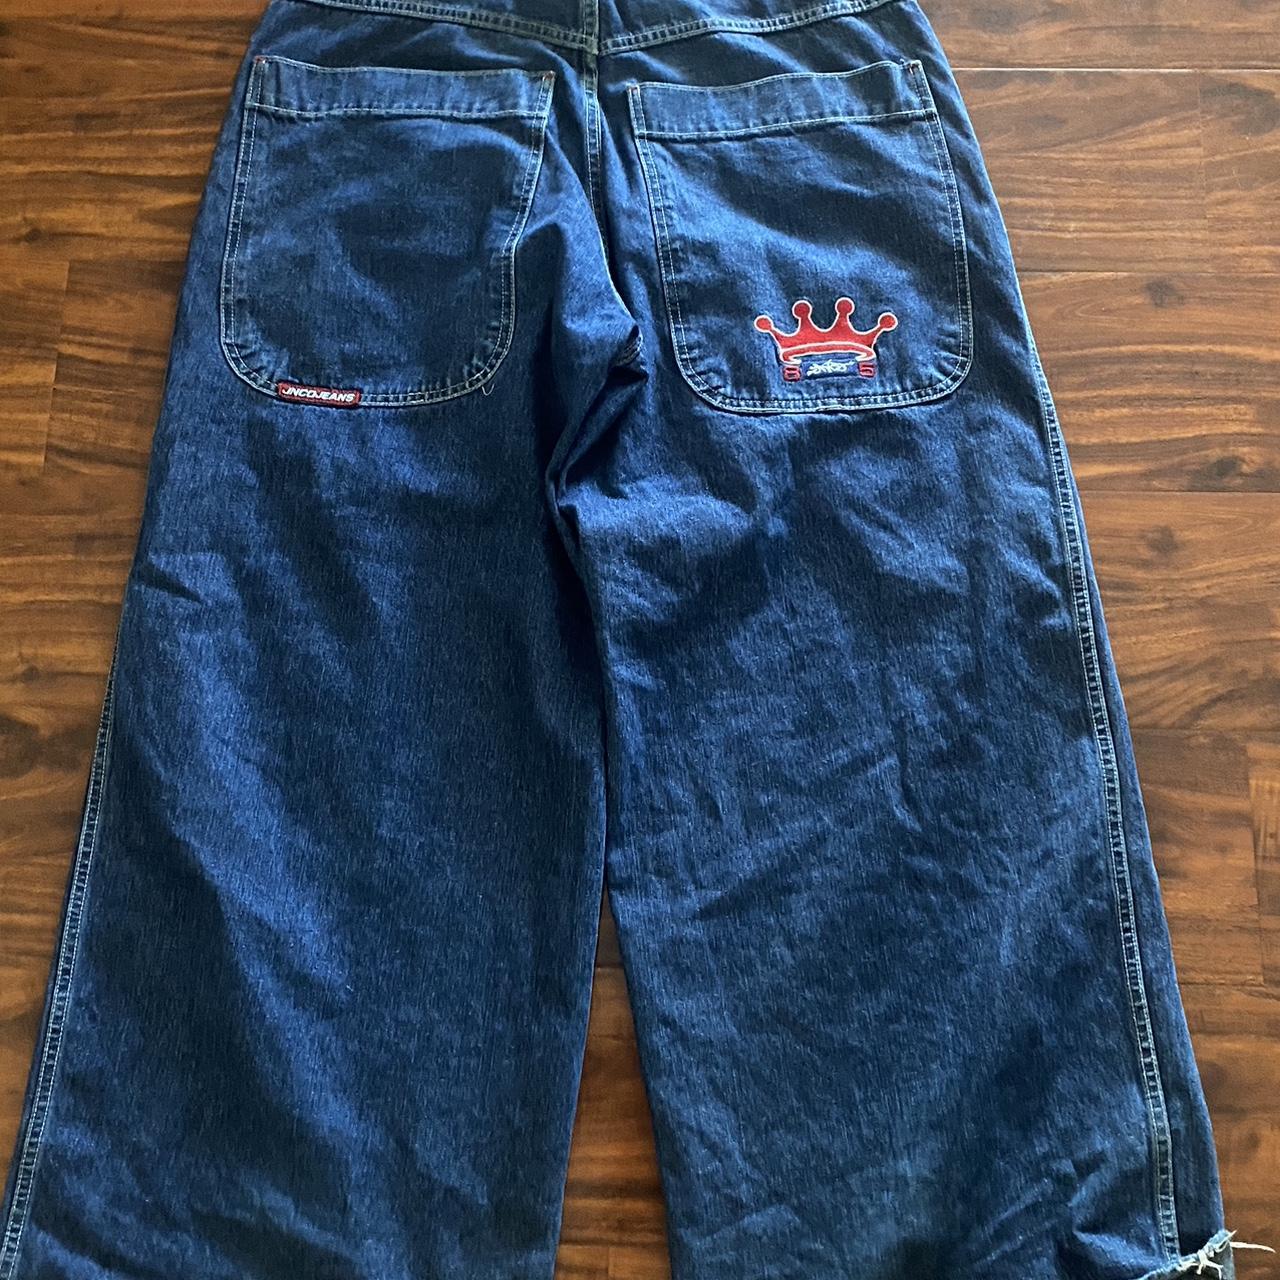 vintage jnco crown jeans not real price do not buy... - Depop